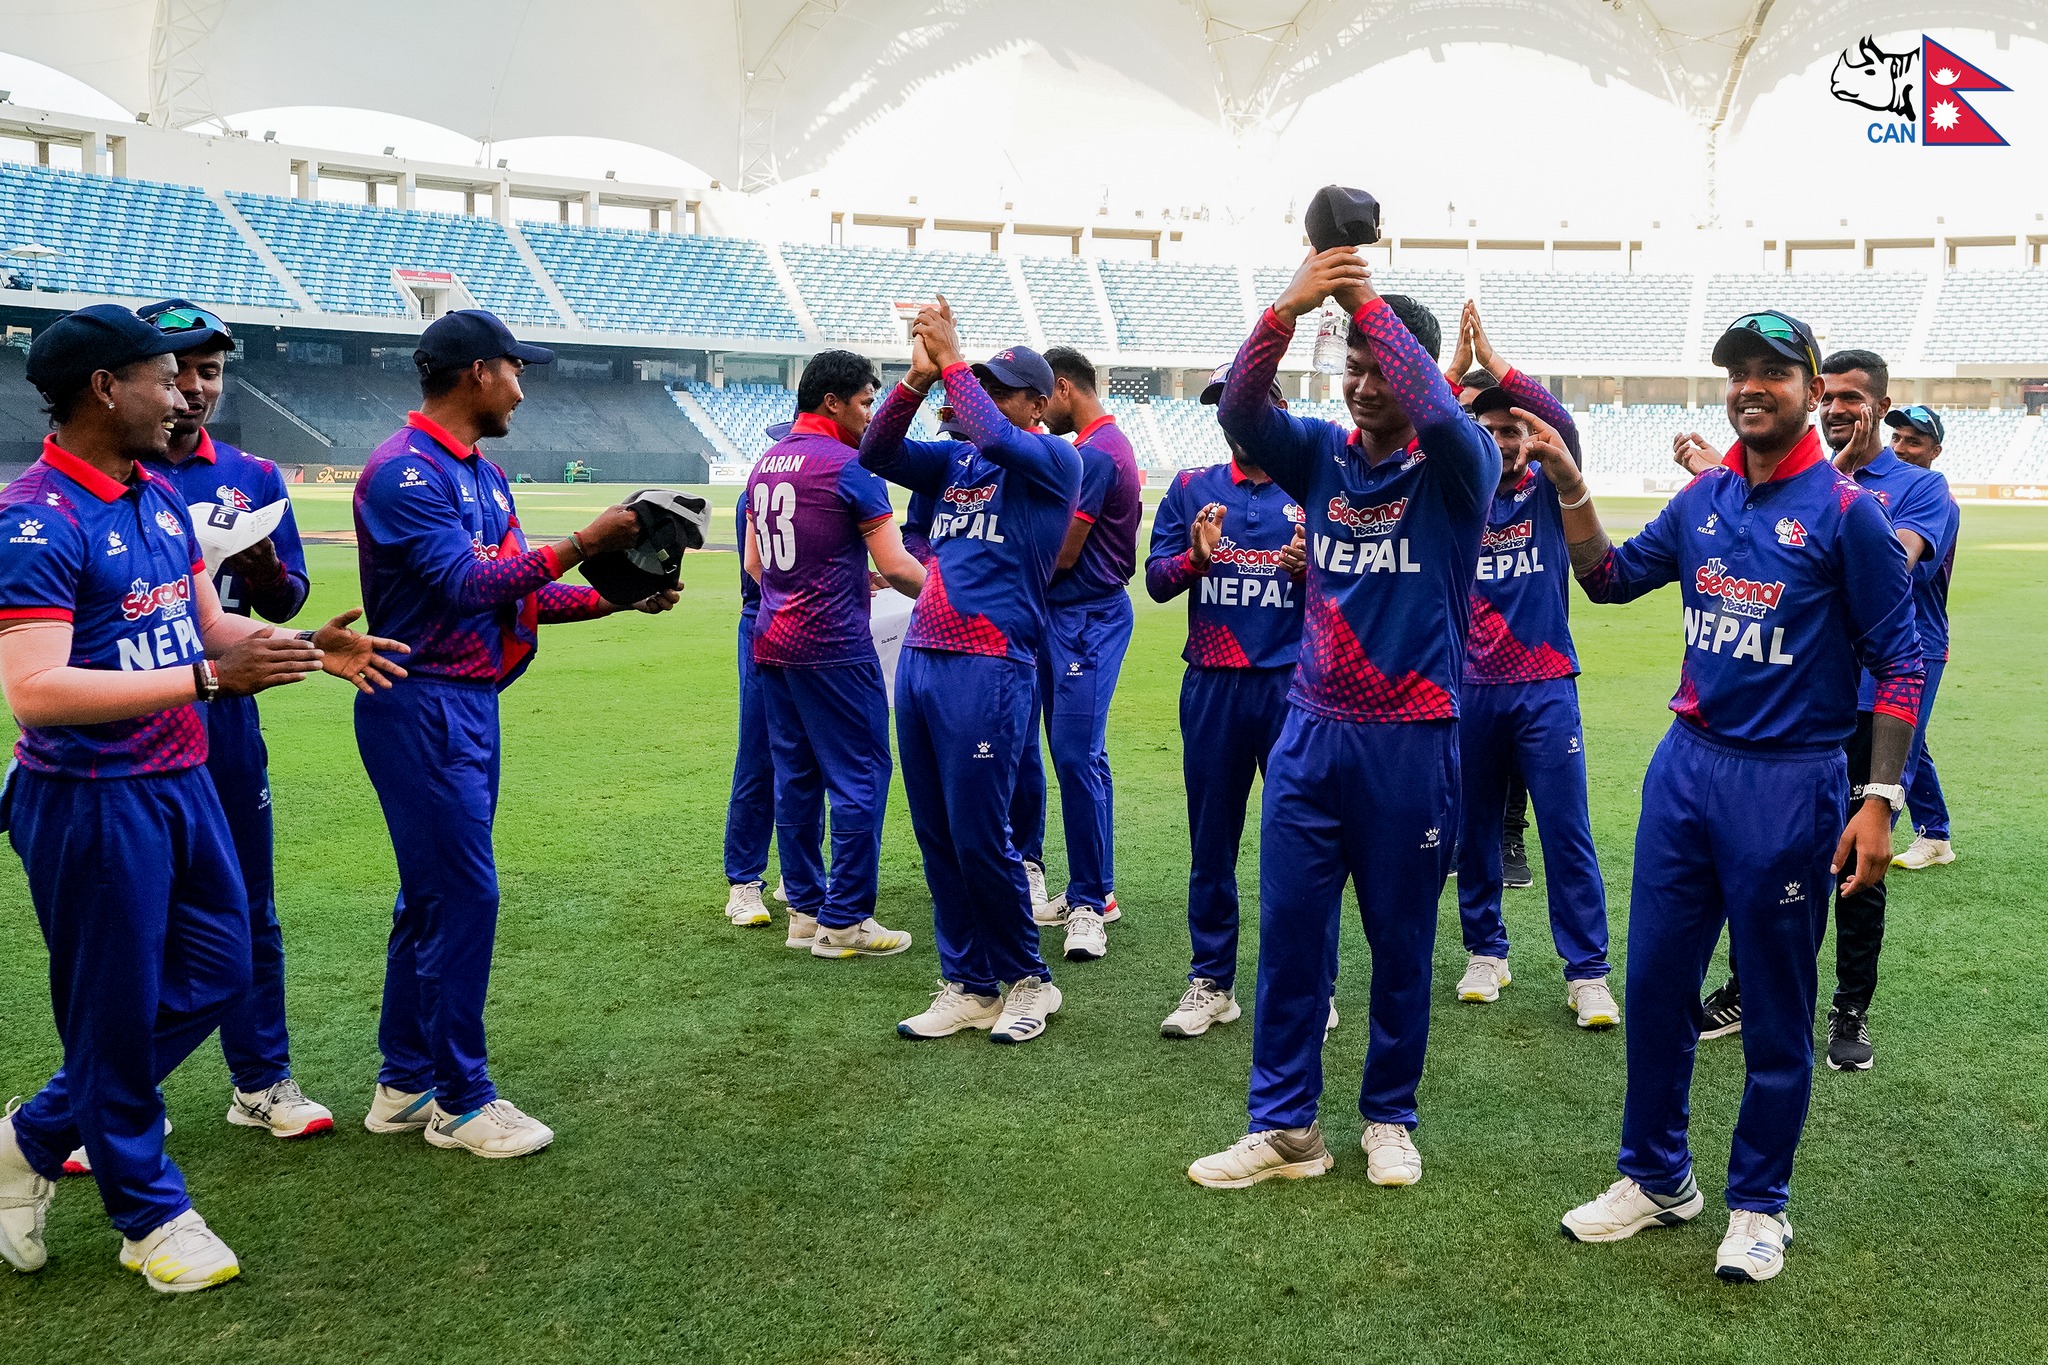 Nepal defeats UAE by 42 runs to keep world cup hope alive